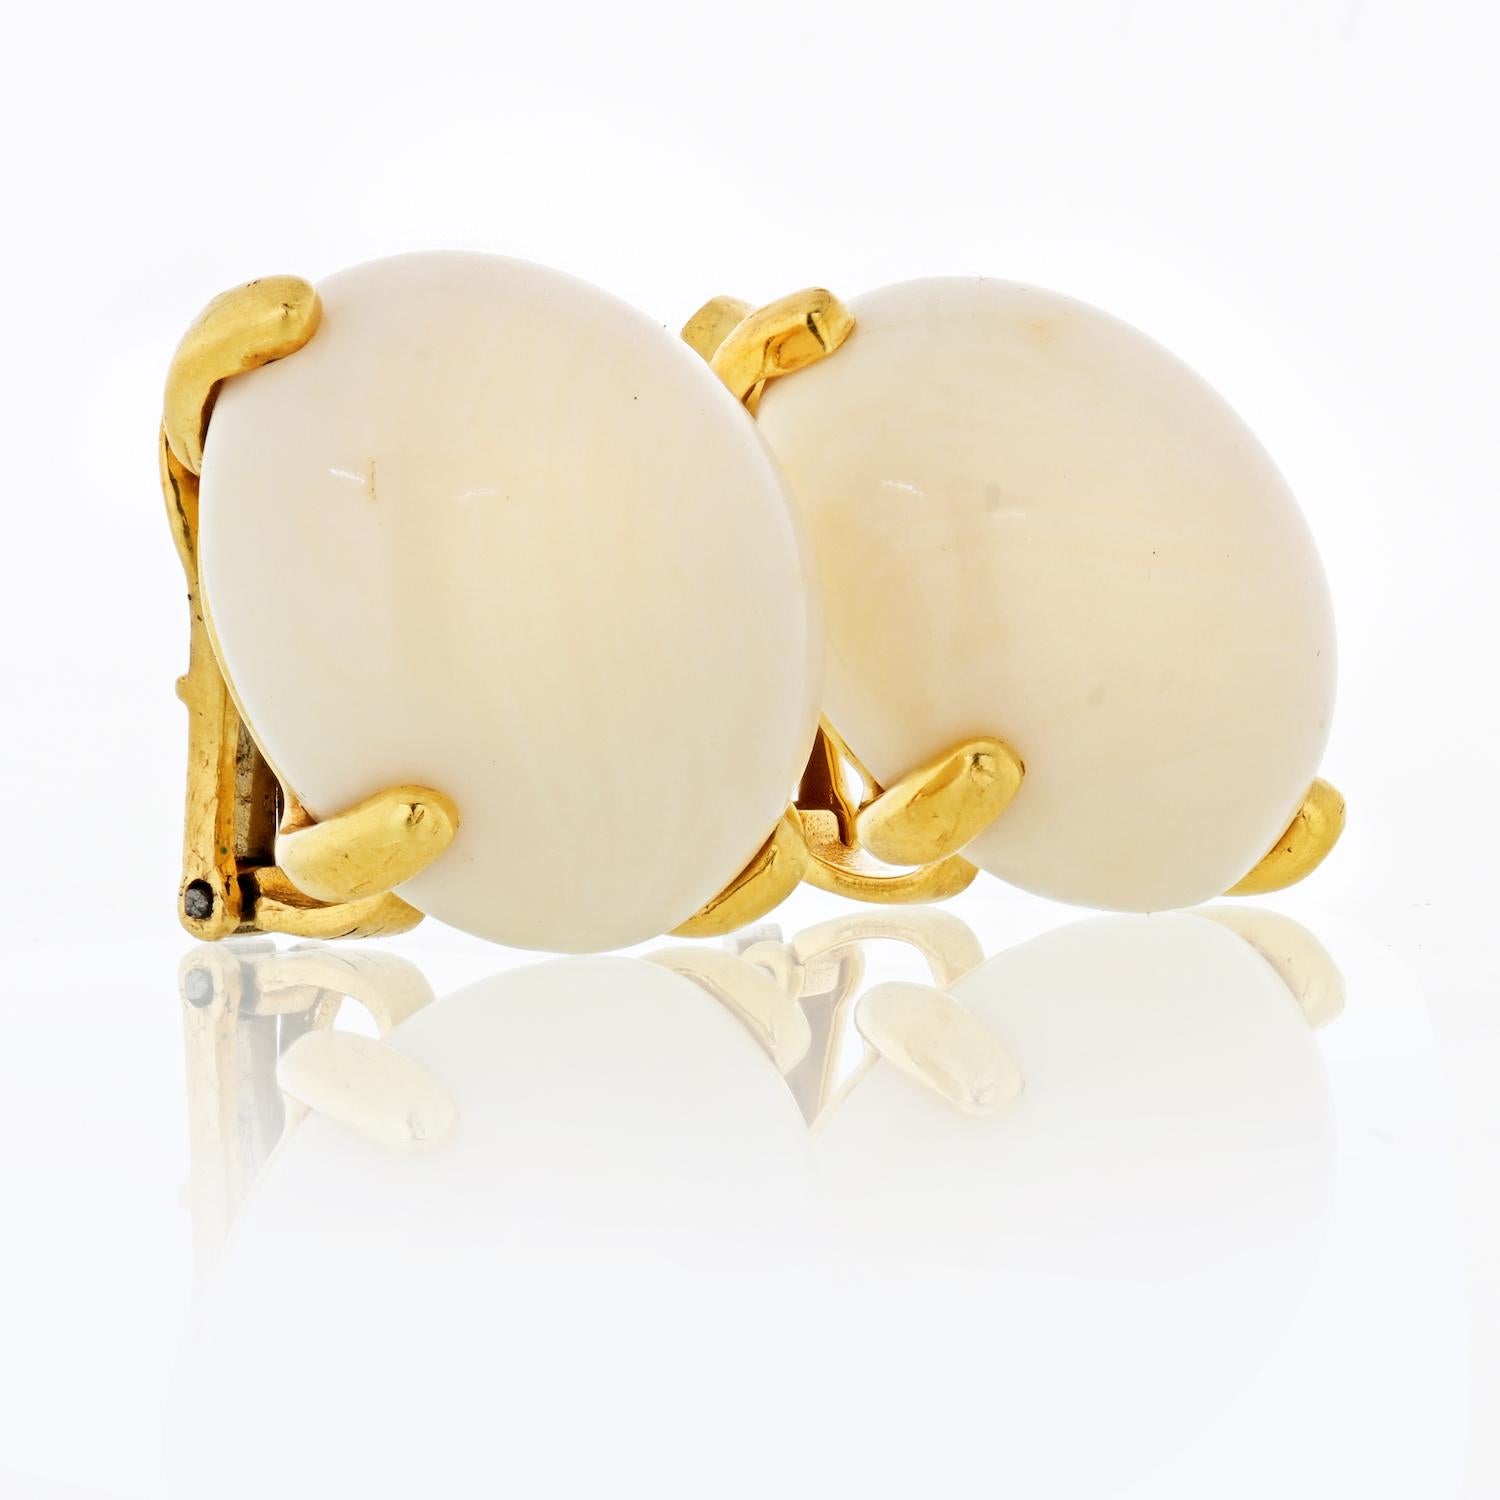 This is a beautiful pair of David Webb earrings in yellow gold with white cabochon cut coral. Simple and beautiful design goes with absolutely every outfit. The smooth surface of the coral has a settle shimmer, the white color has a powderish hue.